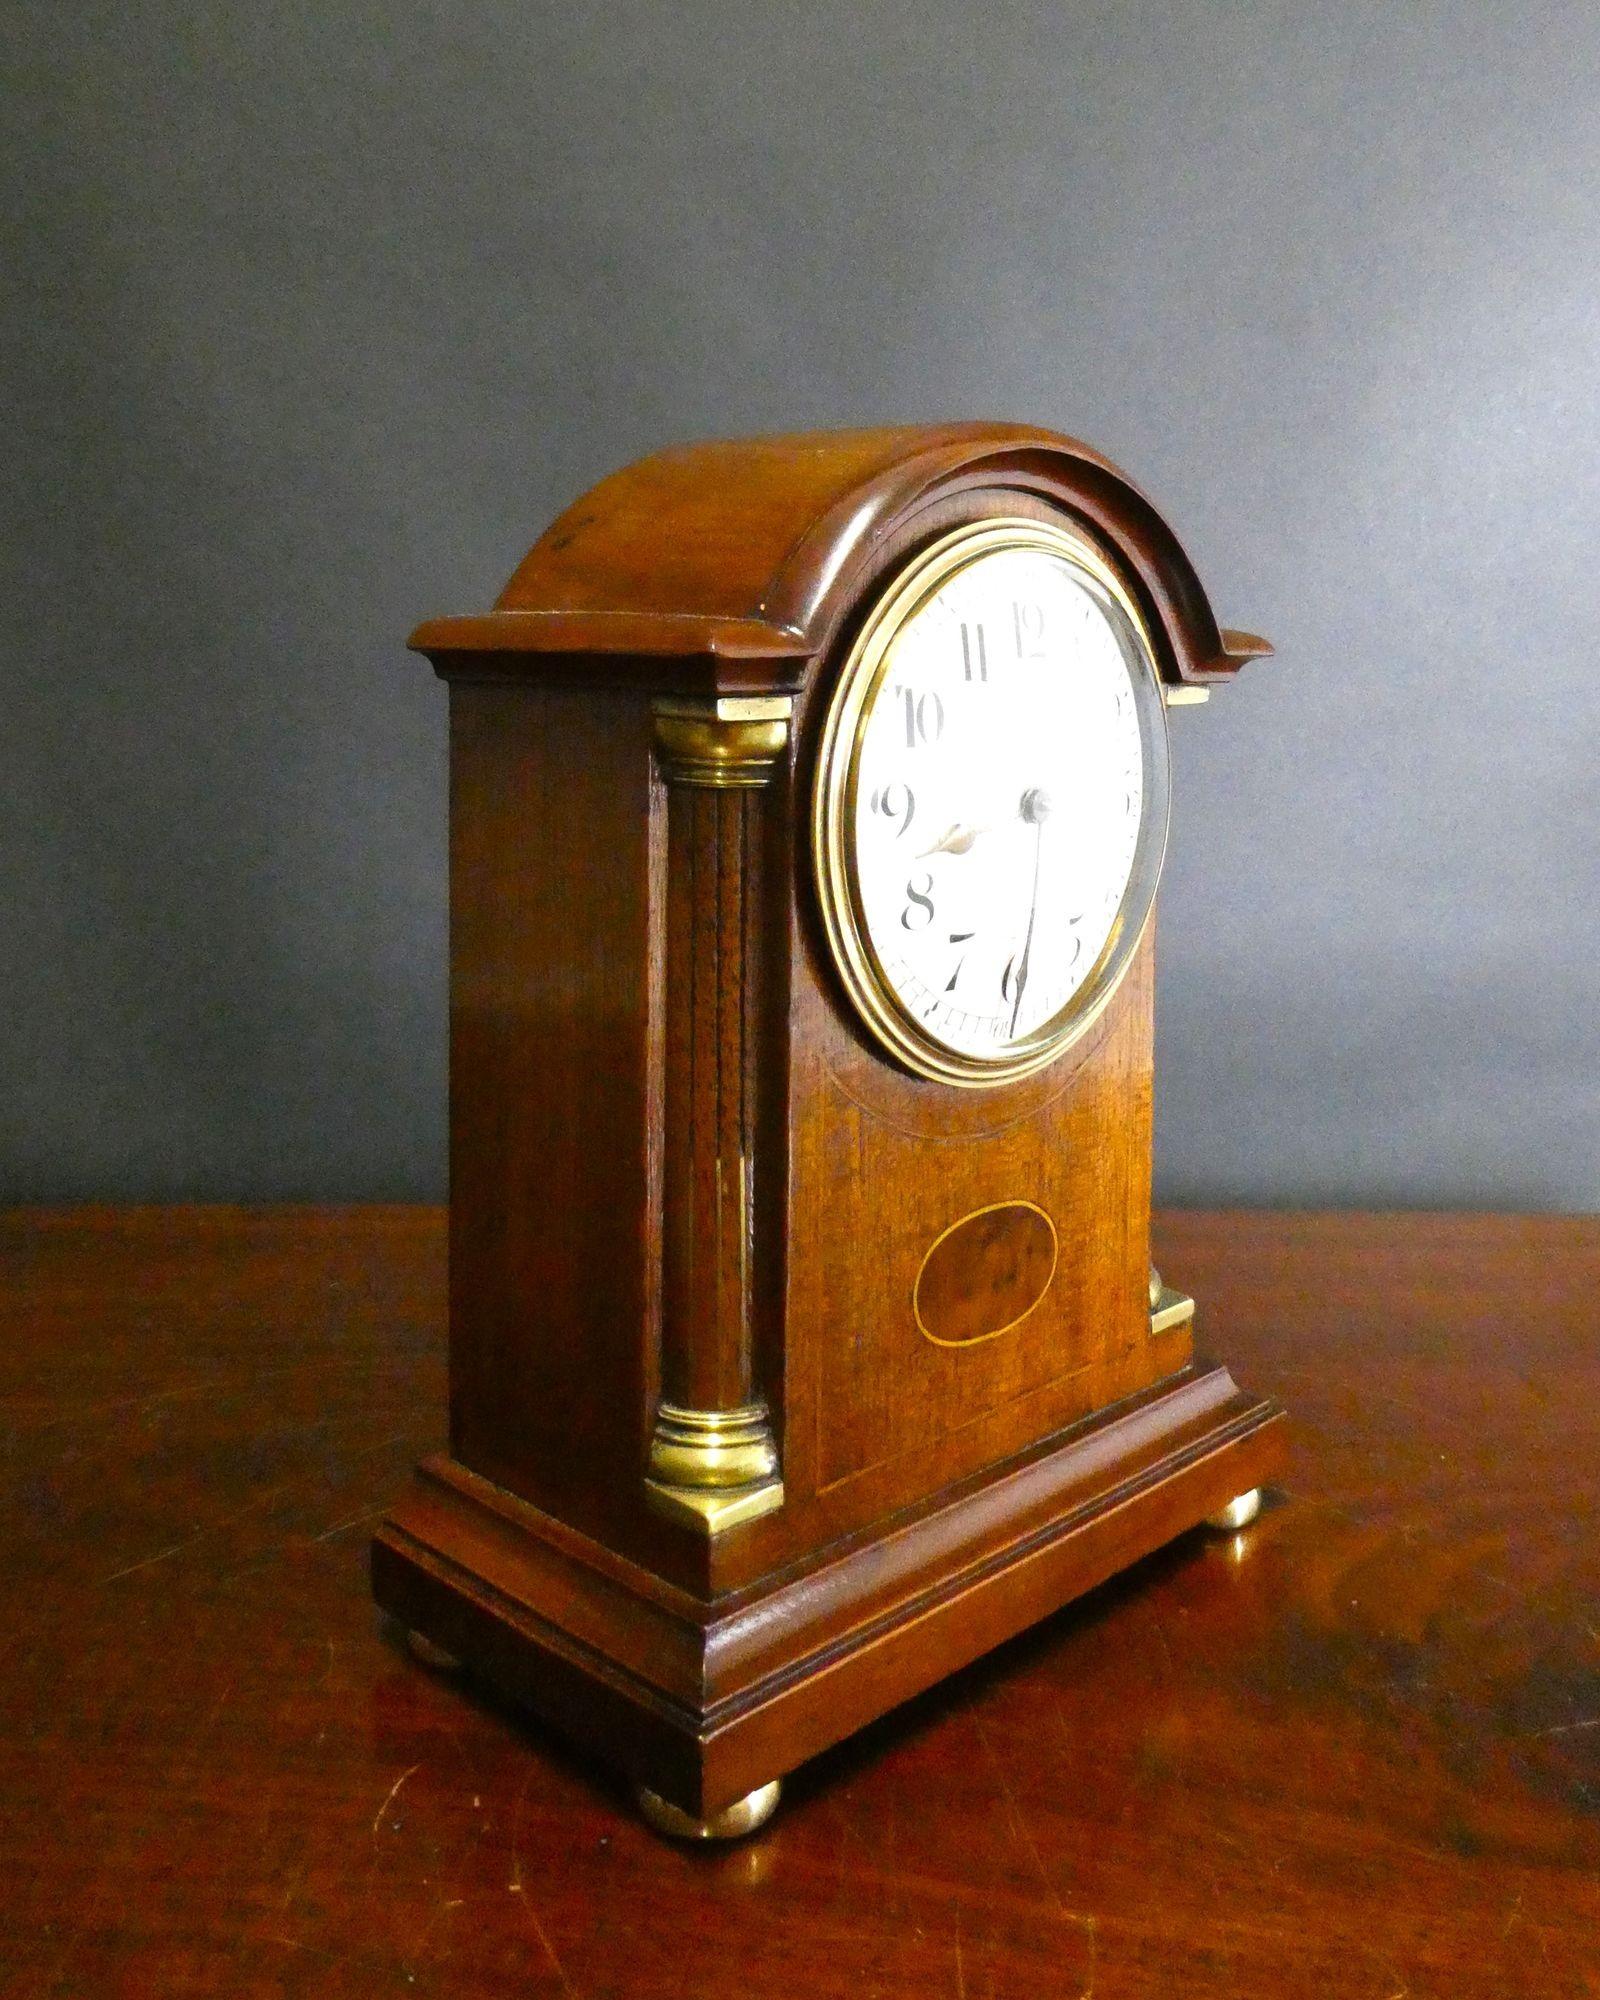 Miniature mahogany mantel clock housed in a break arch case with reeded pillars and brass capitals. Inlaid central cartouche with line inlay and resting on a stepped, moulded plinth with four brass bun feet.
Enamel dial with Arabic numerals,